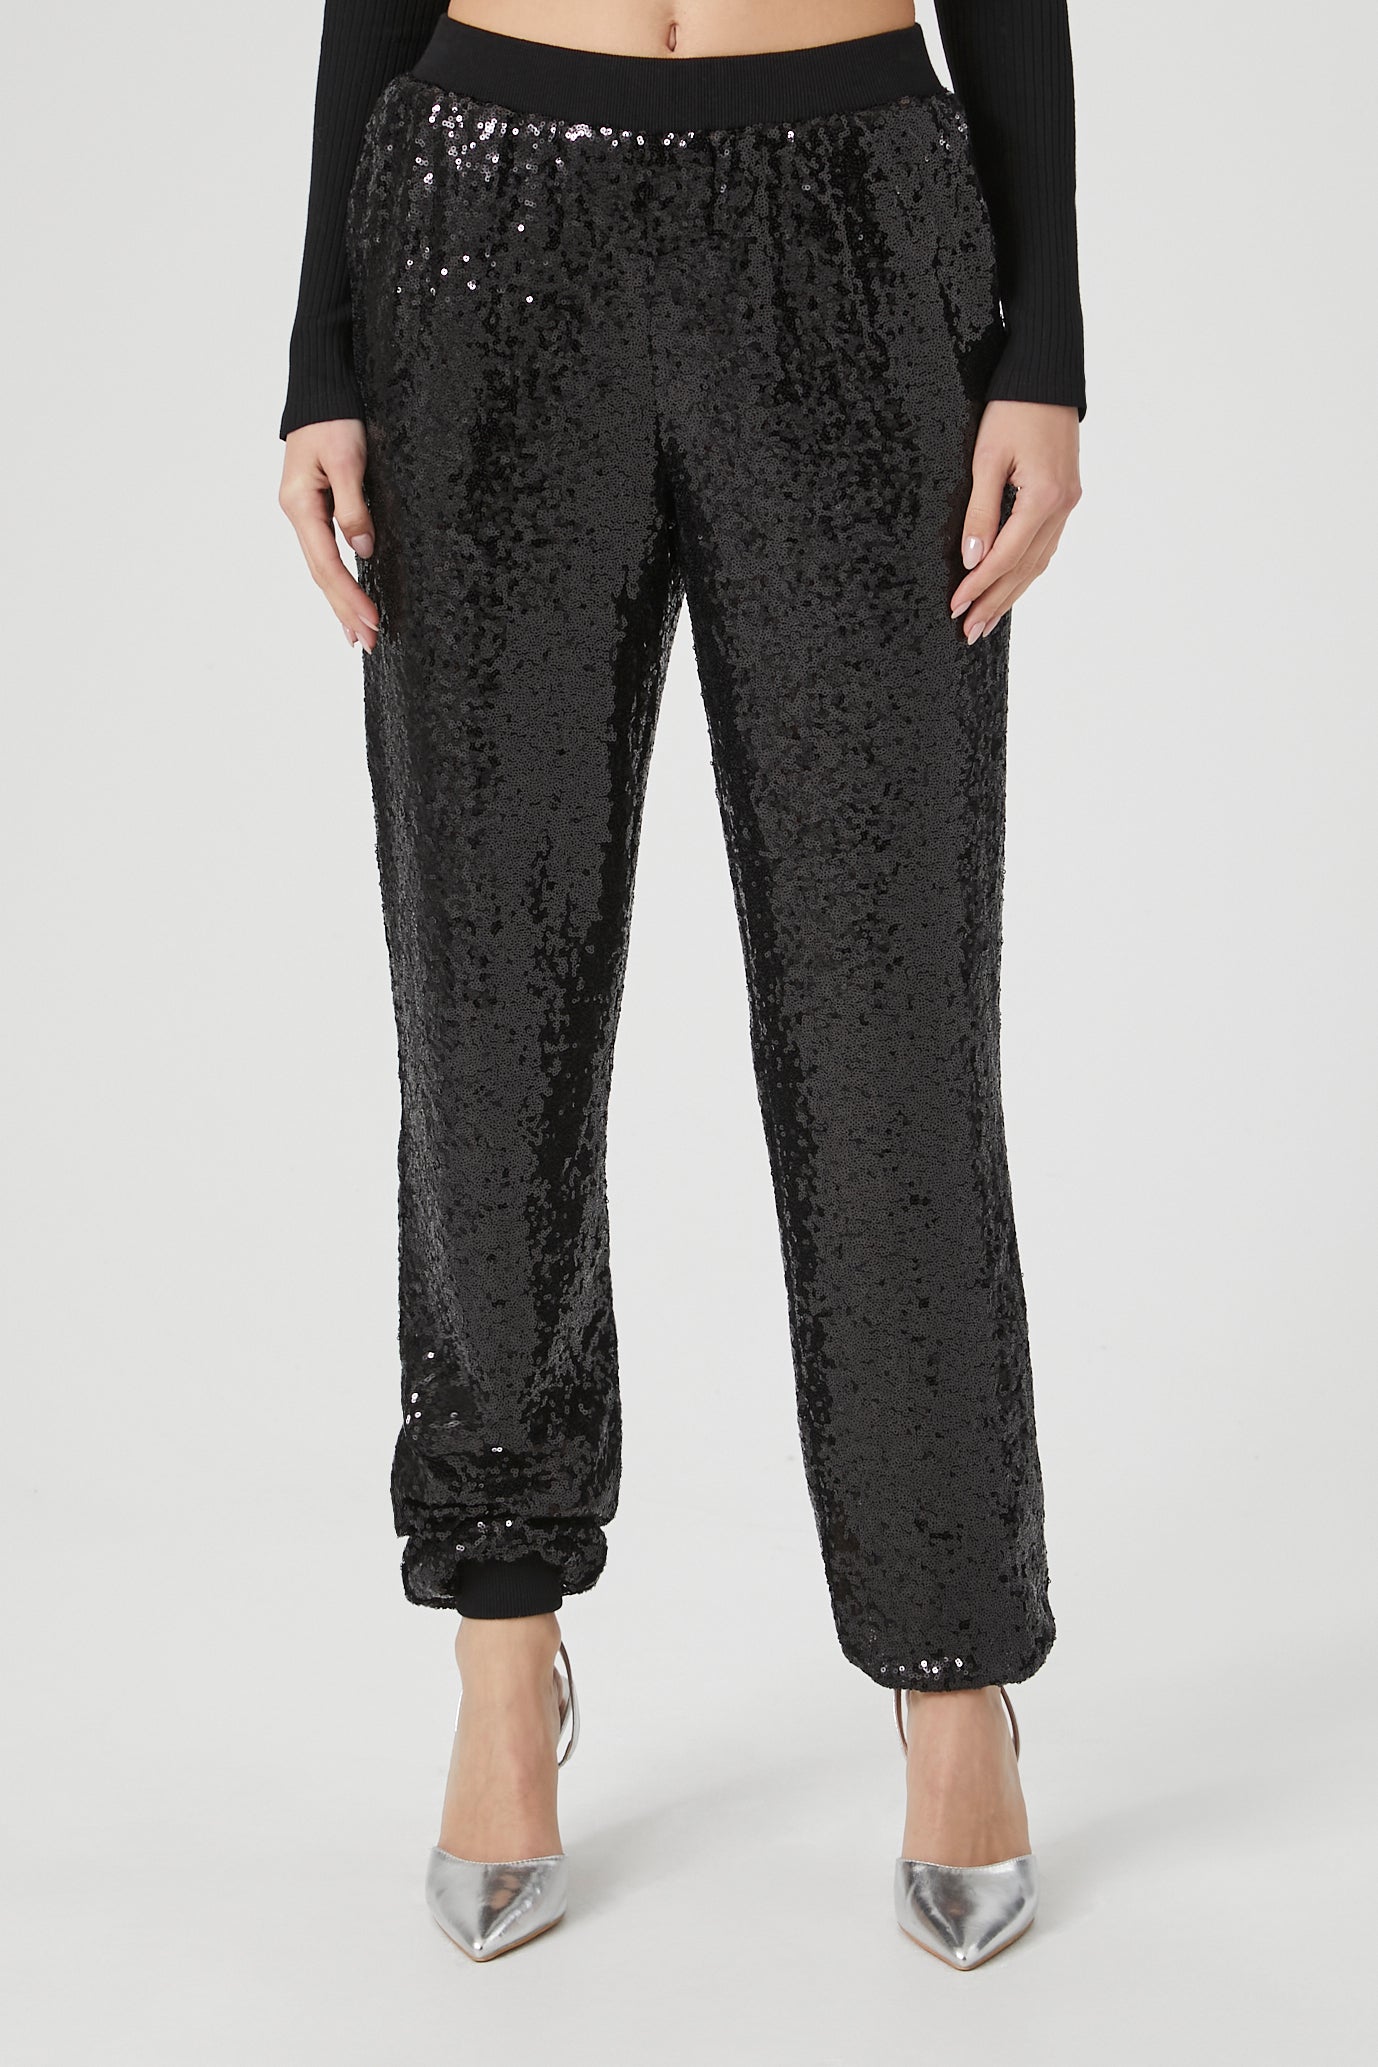 Sequin Mid Rise Jogger